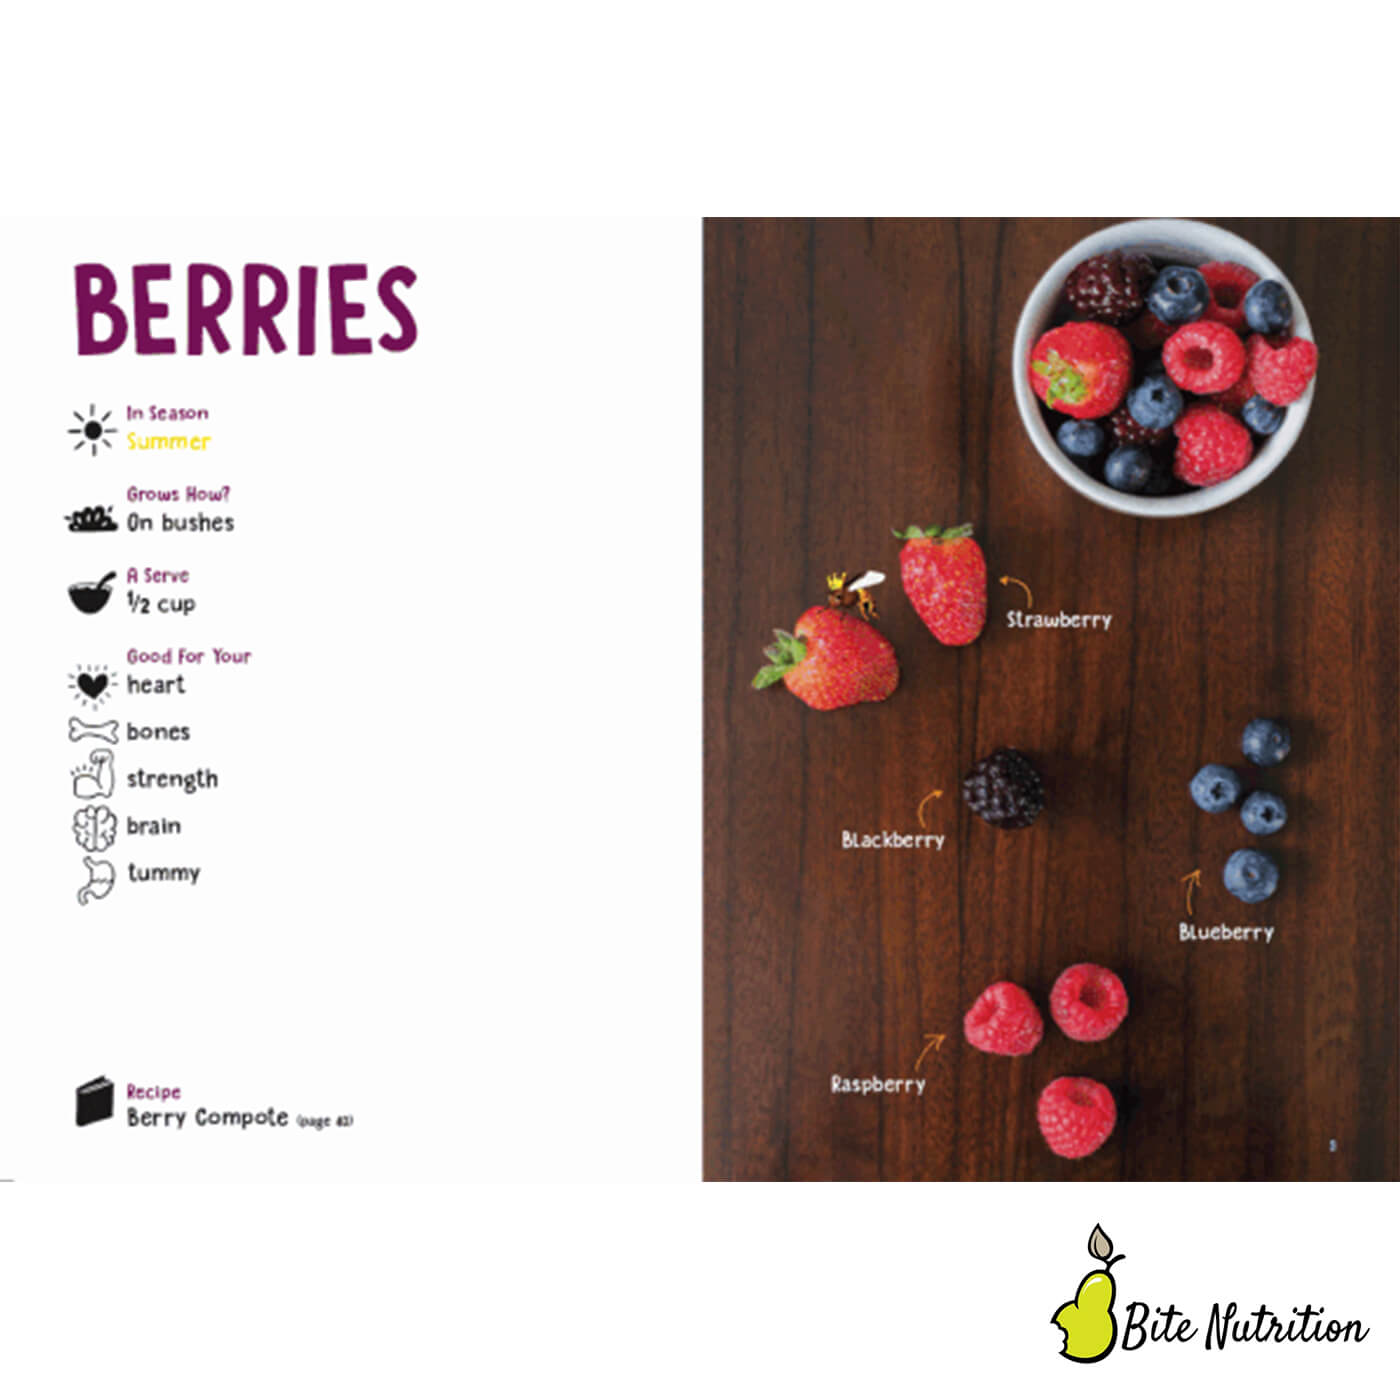 Beautiful Yummy Food: Fruit children's book - 'Berries' page sample